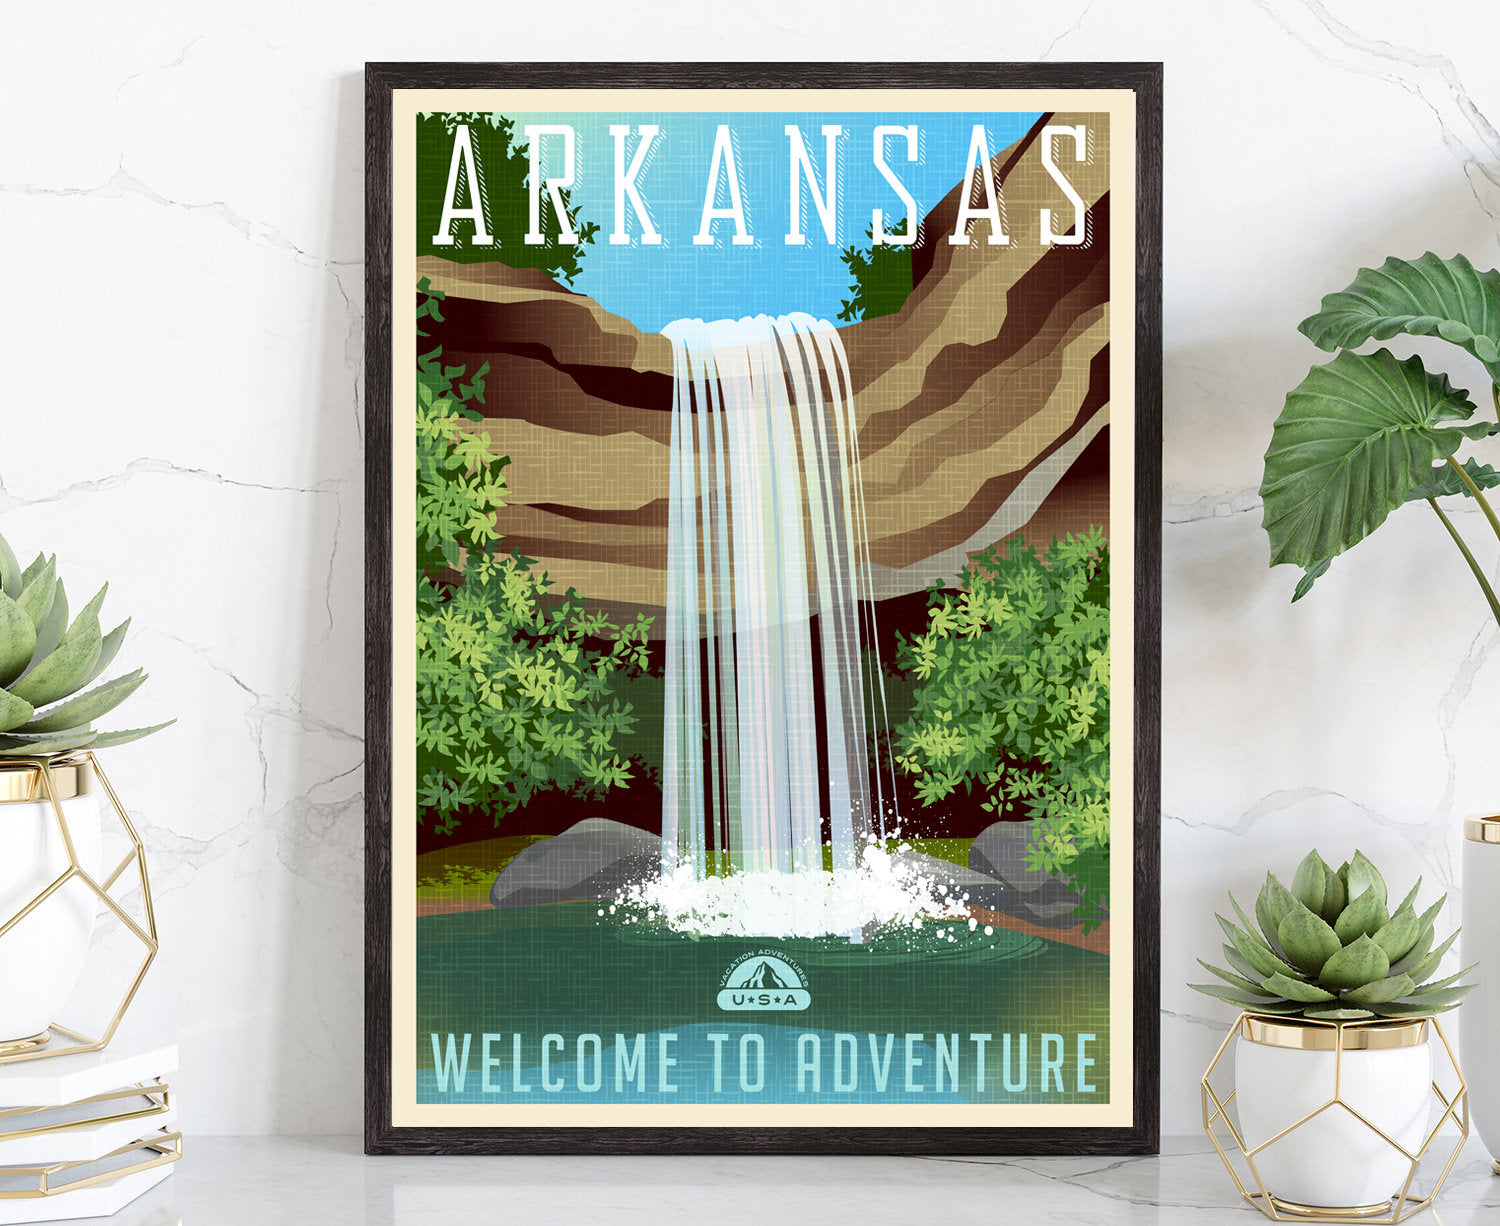 Retro Style Travel Poster, Arkansas Vintage Rustic Poster Print, Home Wall Art, Office Wall Decor, Posters, Arkansas, State Map Poster Print